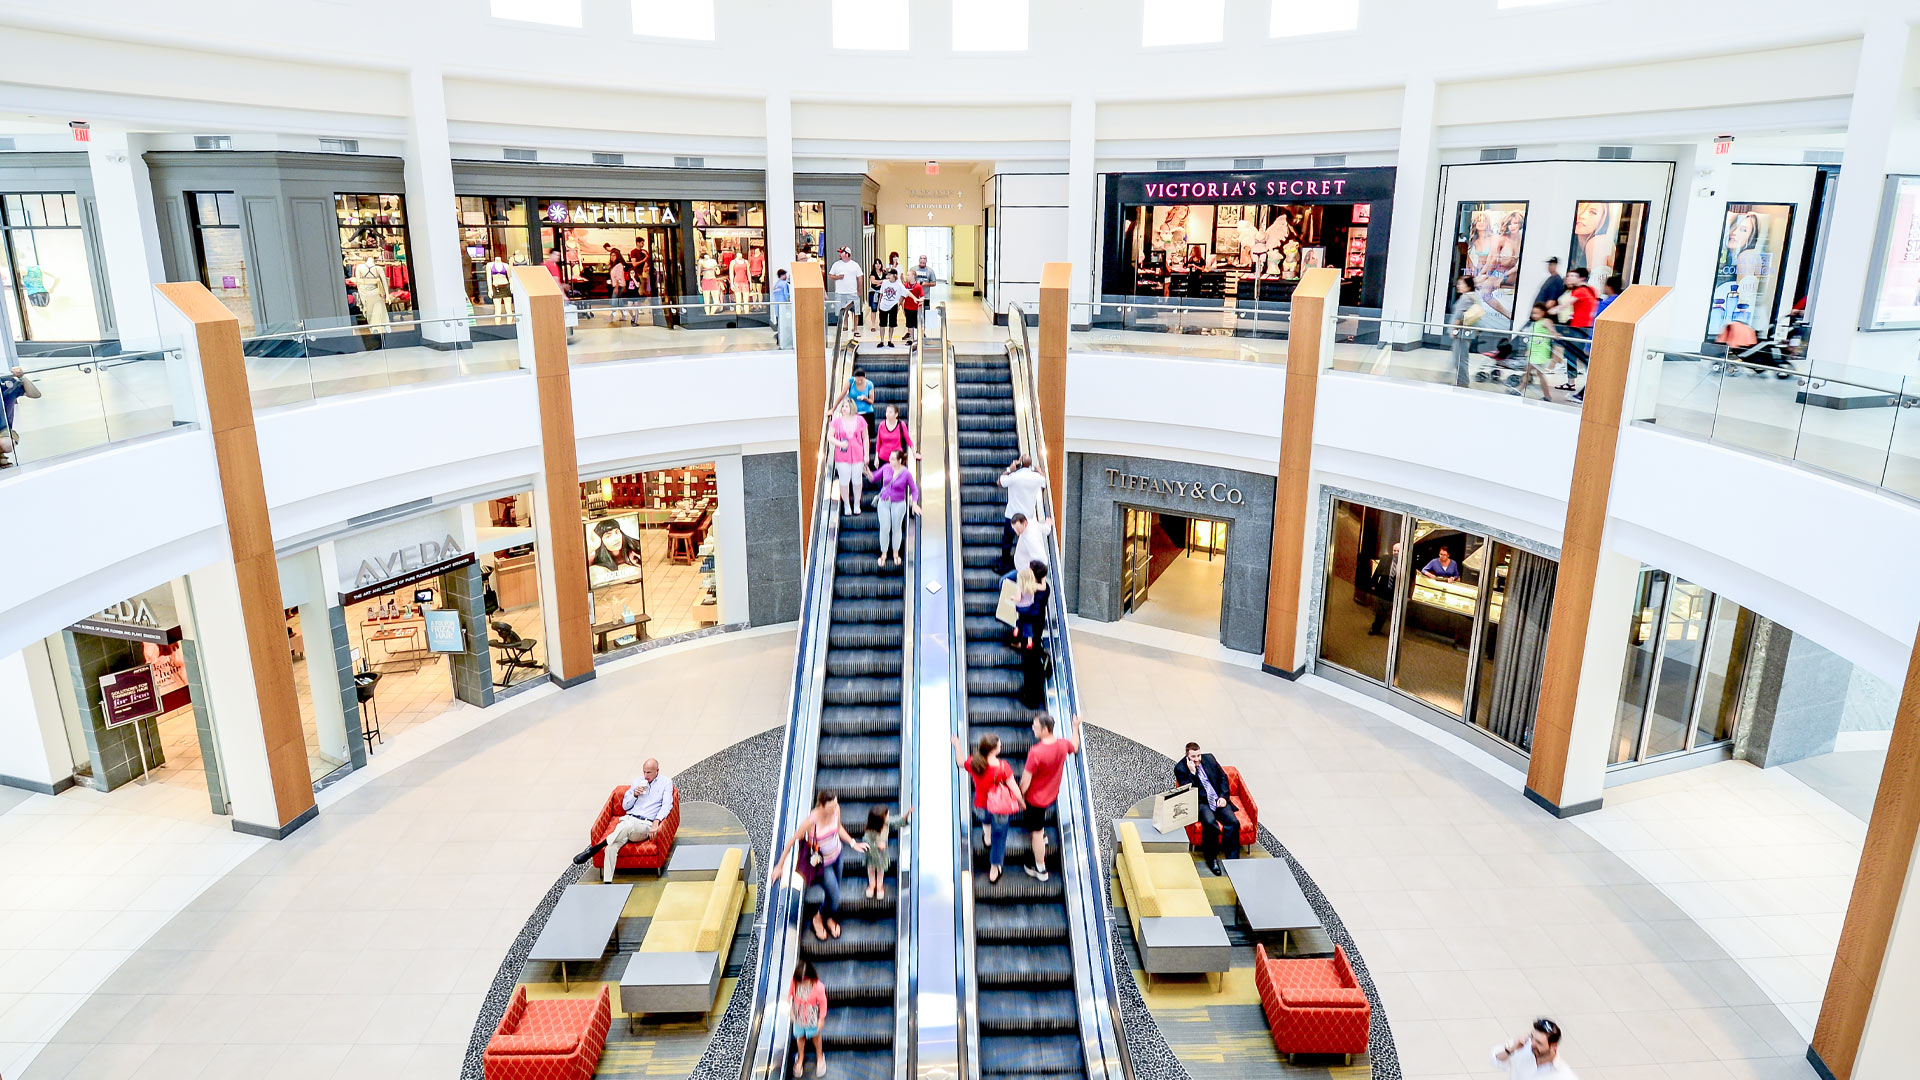 The 10 best malls and shopping centers in Chicago, ranked